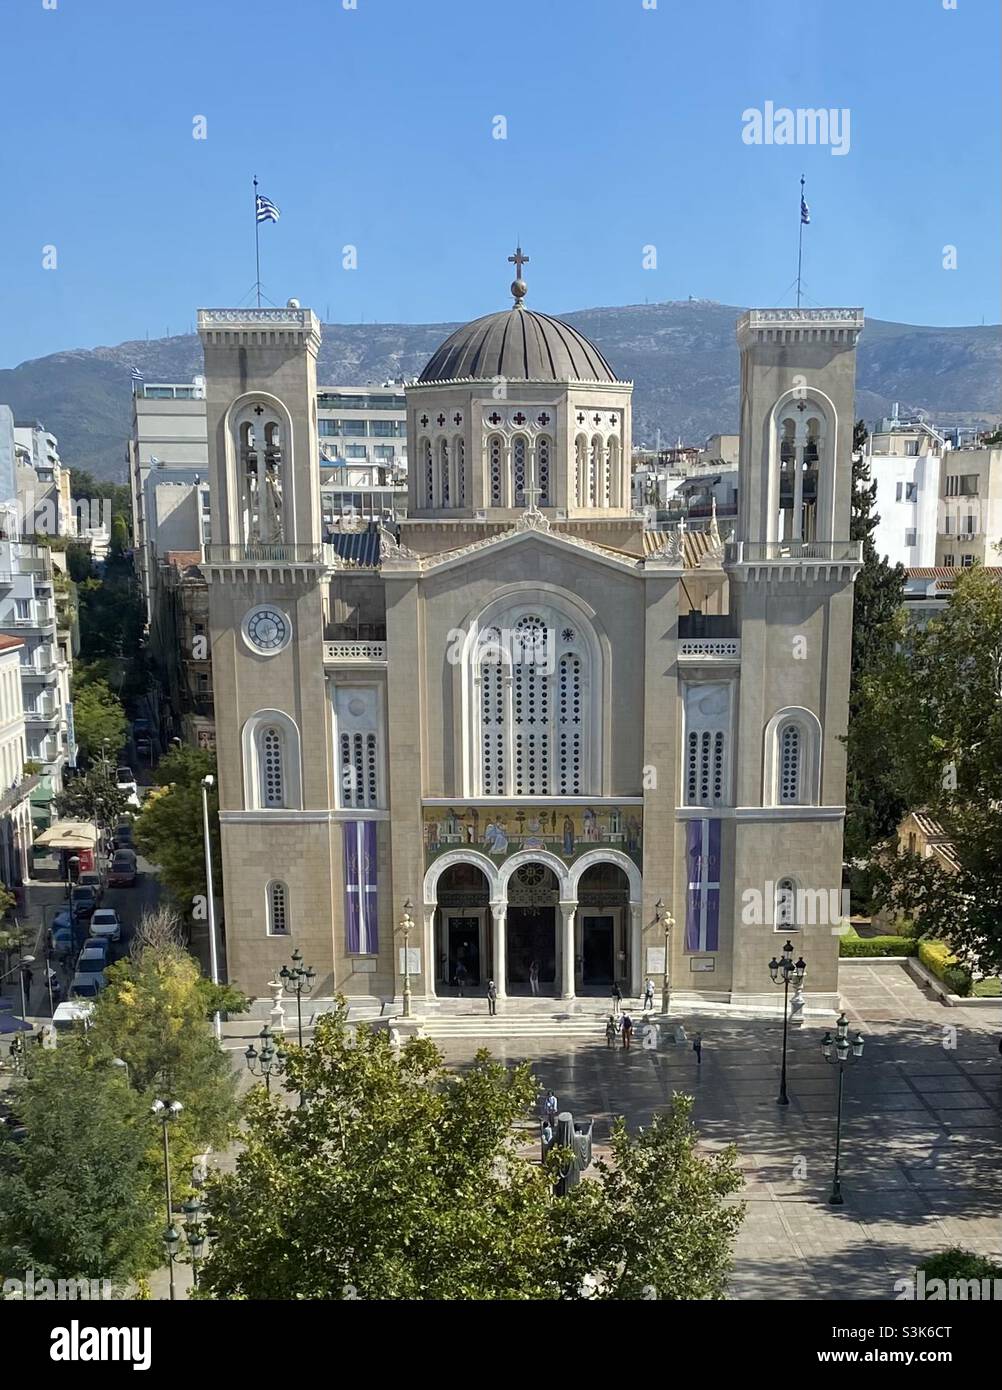 The Metropolitan Cathedral of the Annunciation (Metropolis) in Athens, Greece. Designed by Hansen, building started in 1842 using marble from demolished churches. The cathedral is an iconic building. Stock Photo